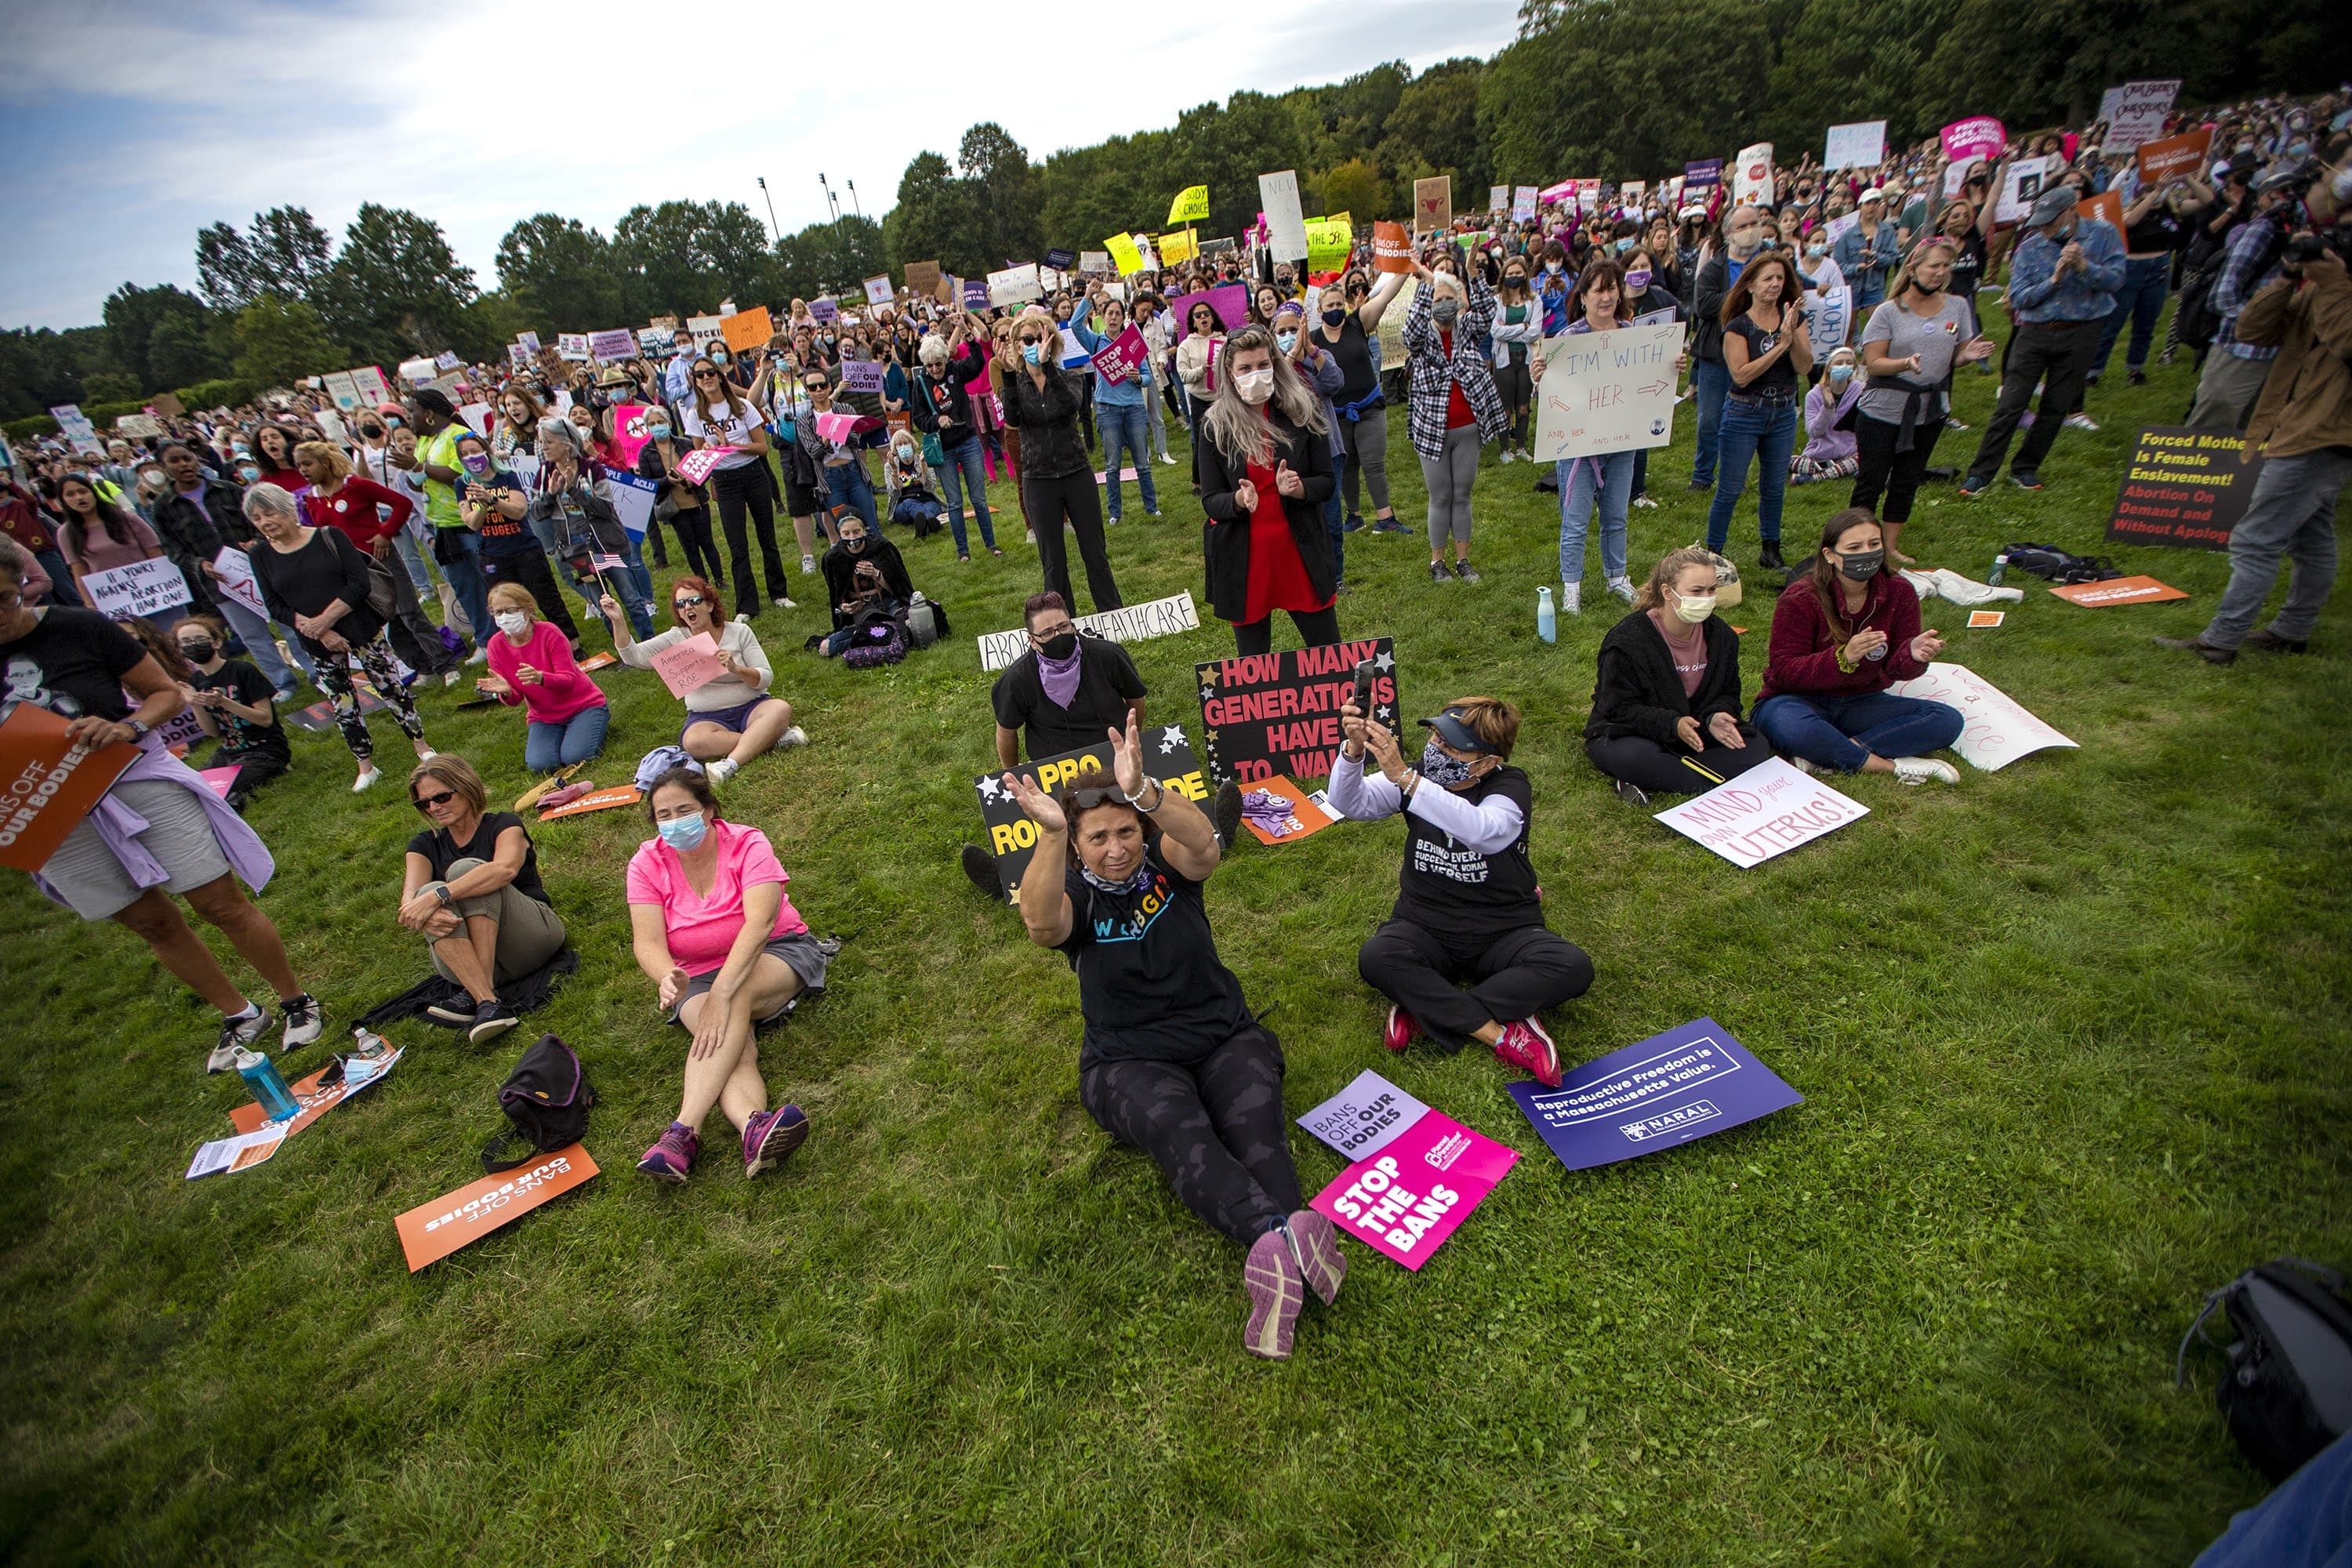 At least 1,000 people gathered at the Franklin Park Playstead to rally as part of nationwide protests happening to defend abortion rights. (Jesse Costa/WBUR)